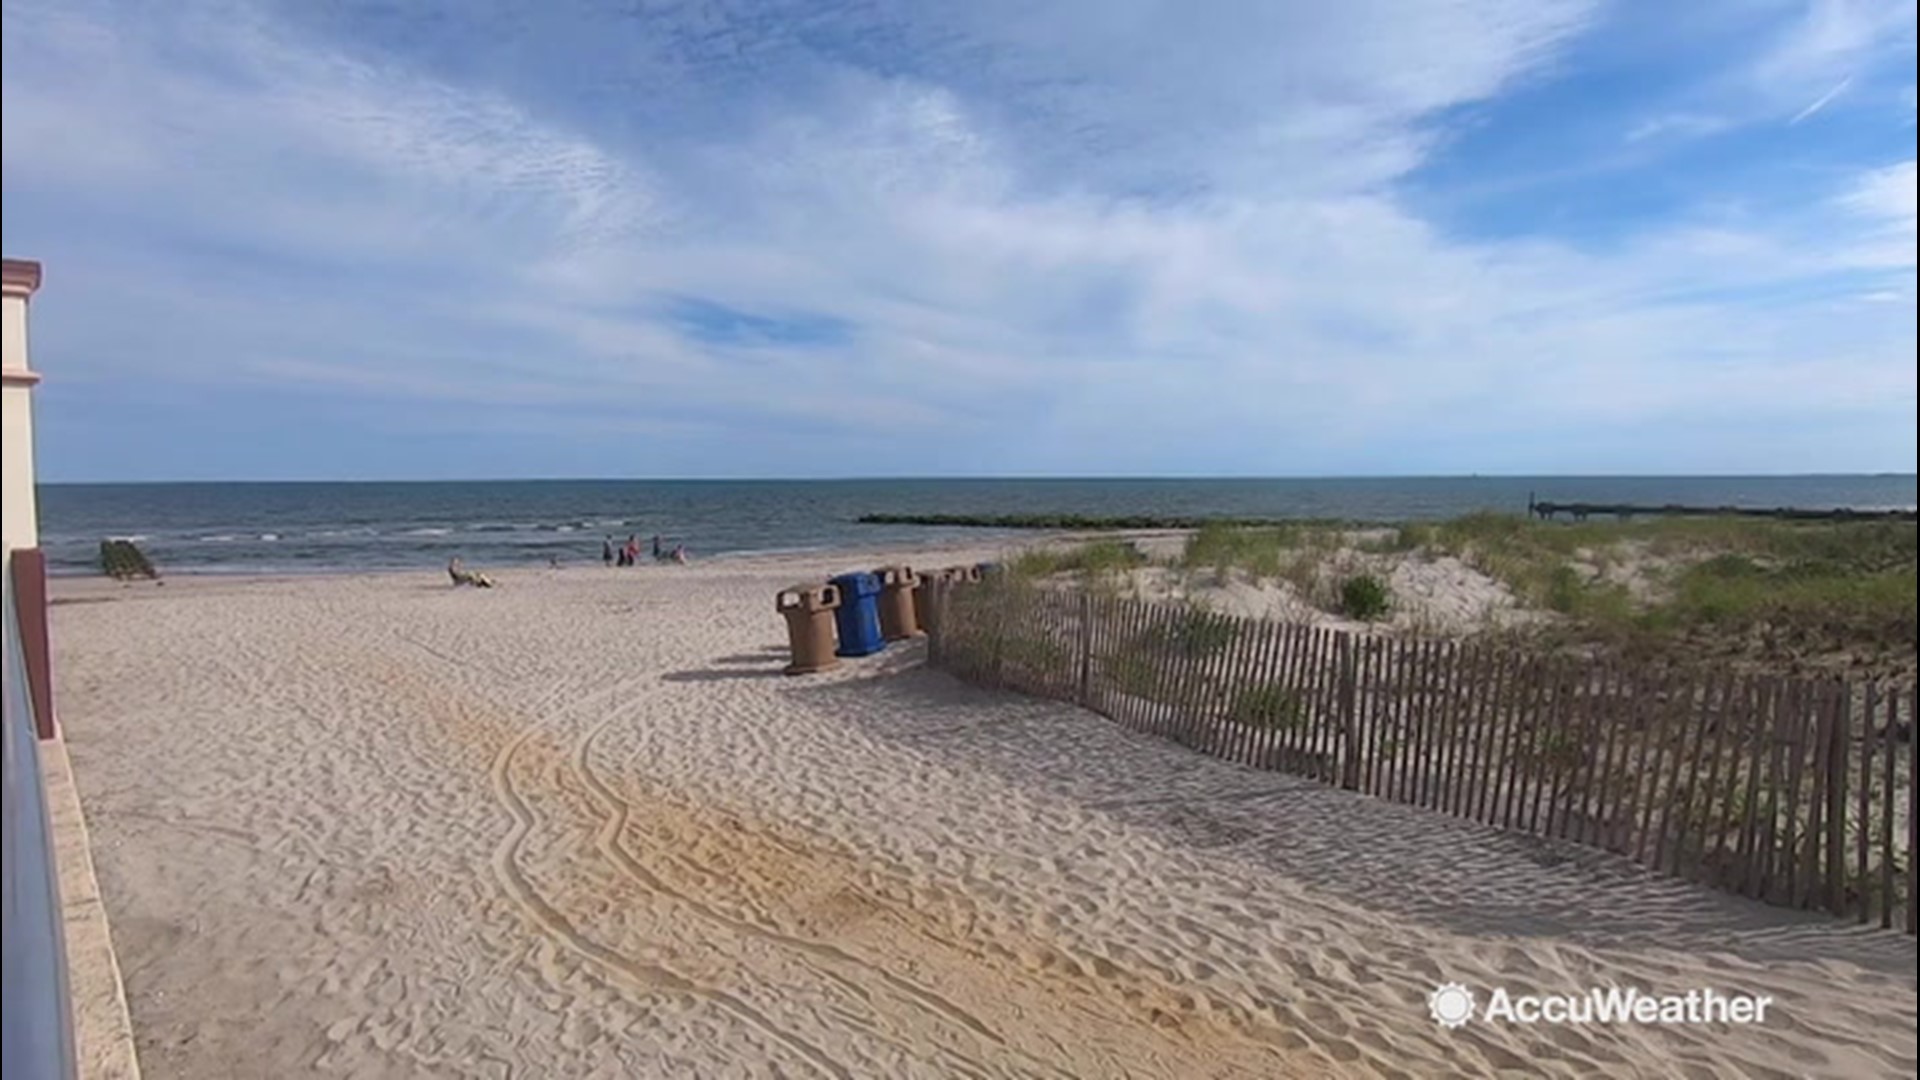 First responders warn of rip current risks. AccuWeather's Kena Vernon shows us ways of staying safe while spending time out in the water.